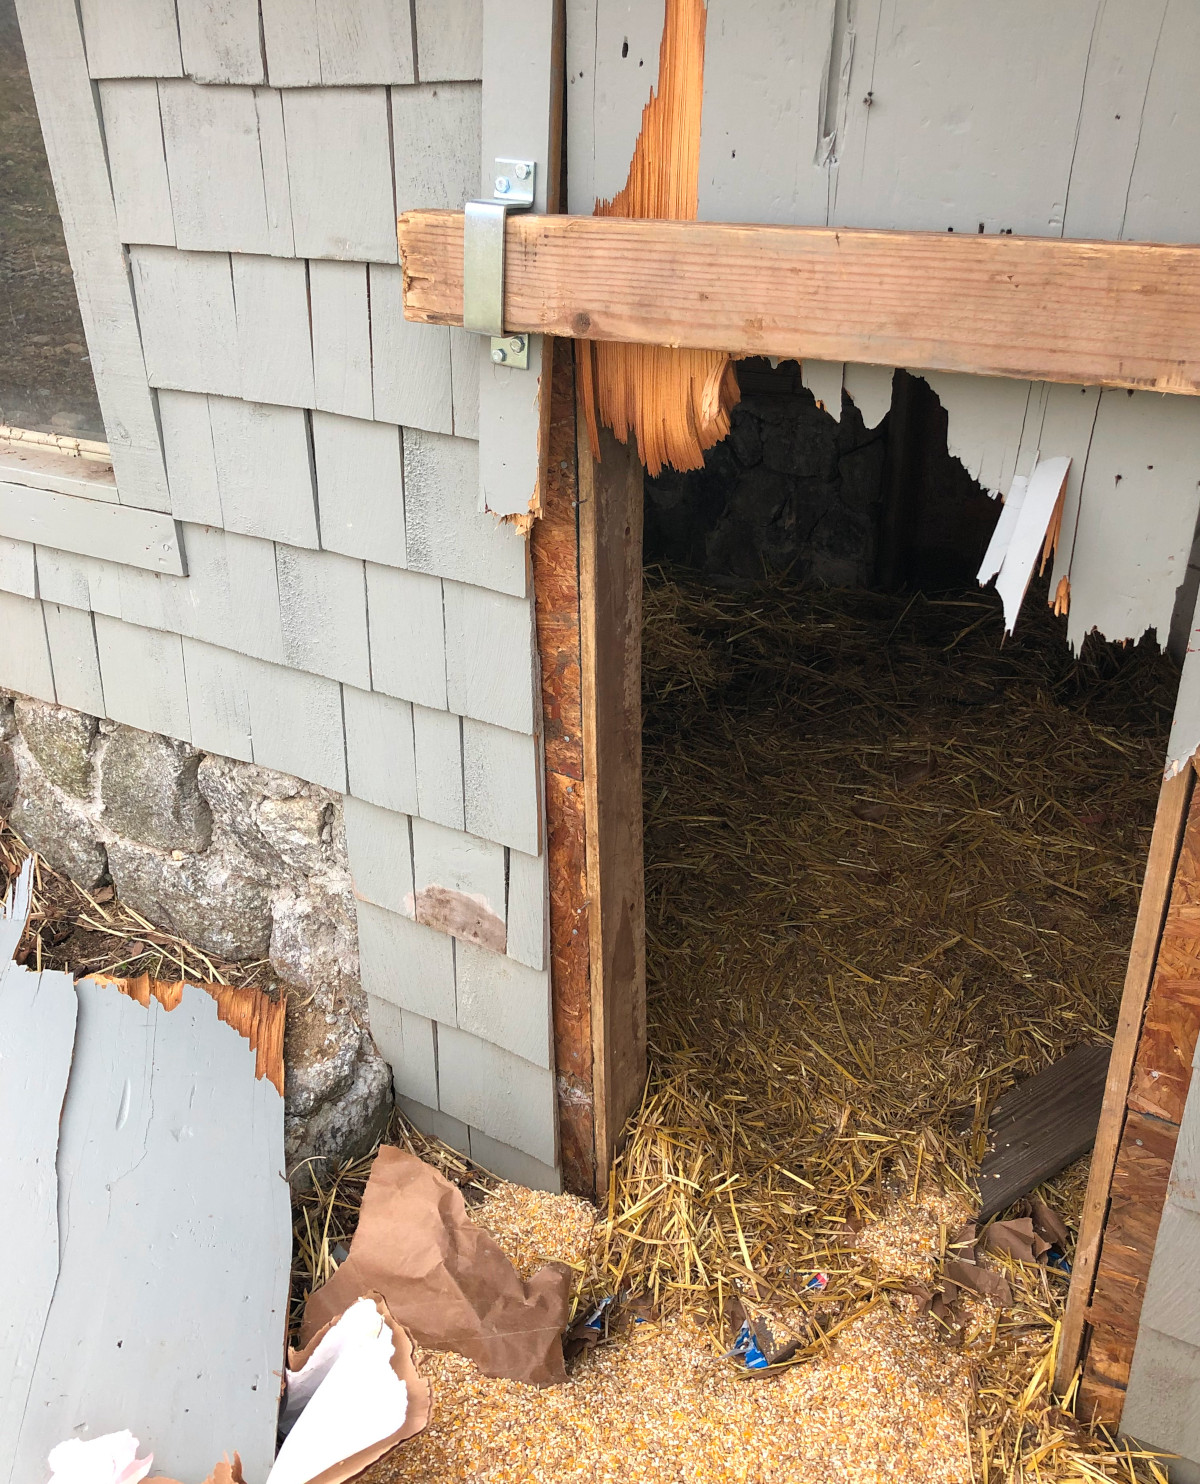 This is the result of a bear attack on a chicken coop and the door is broken clean in half.